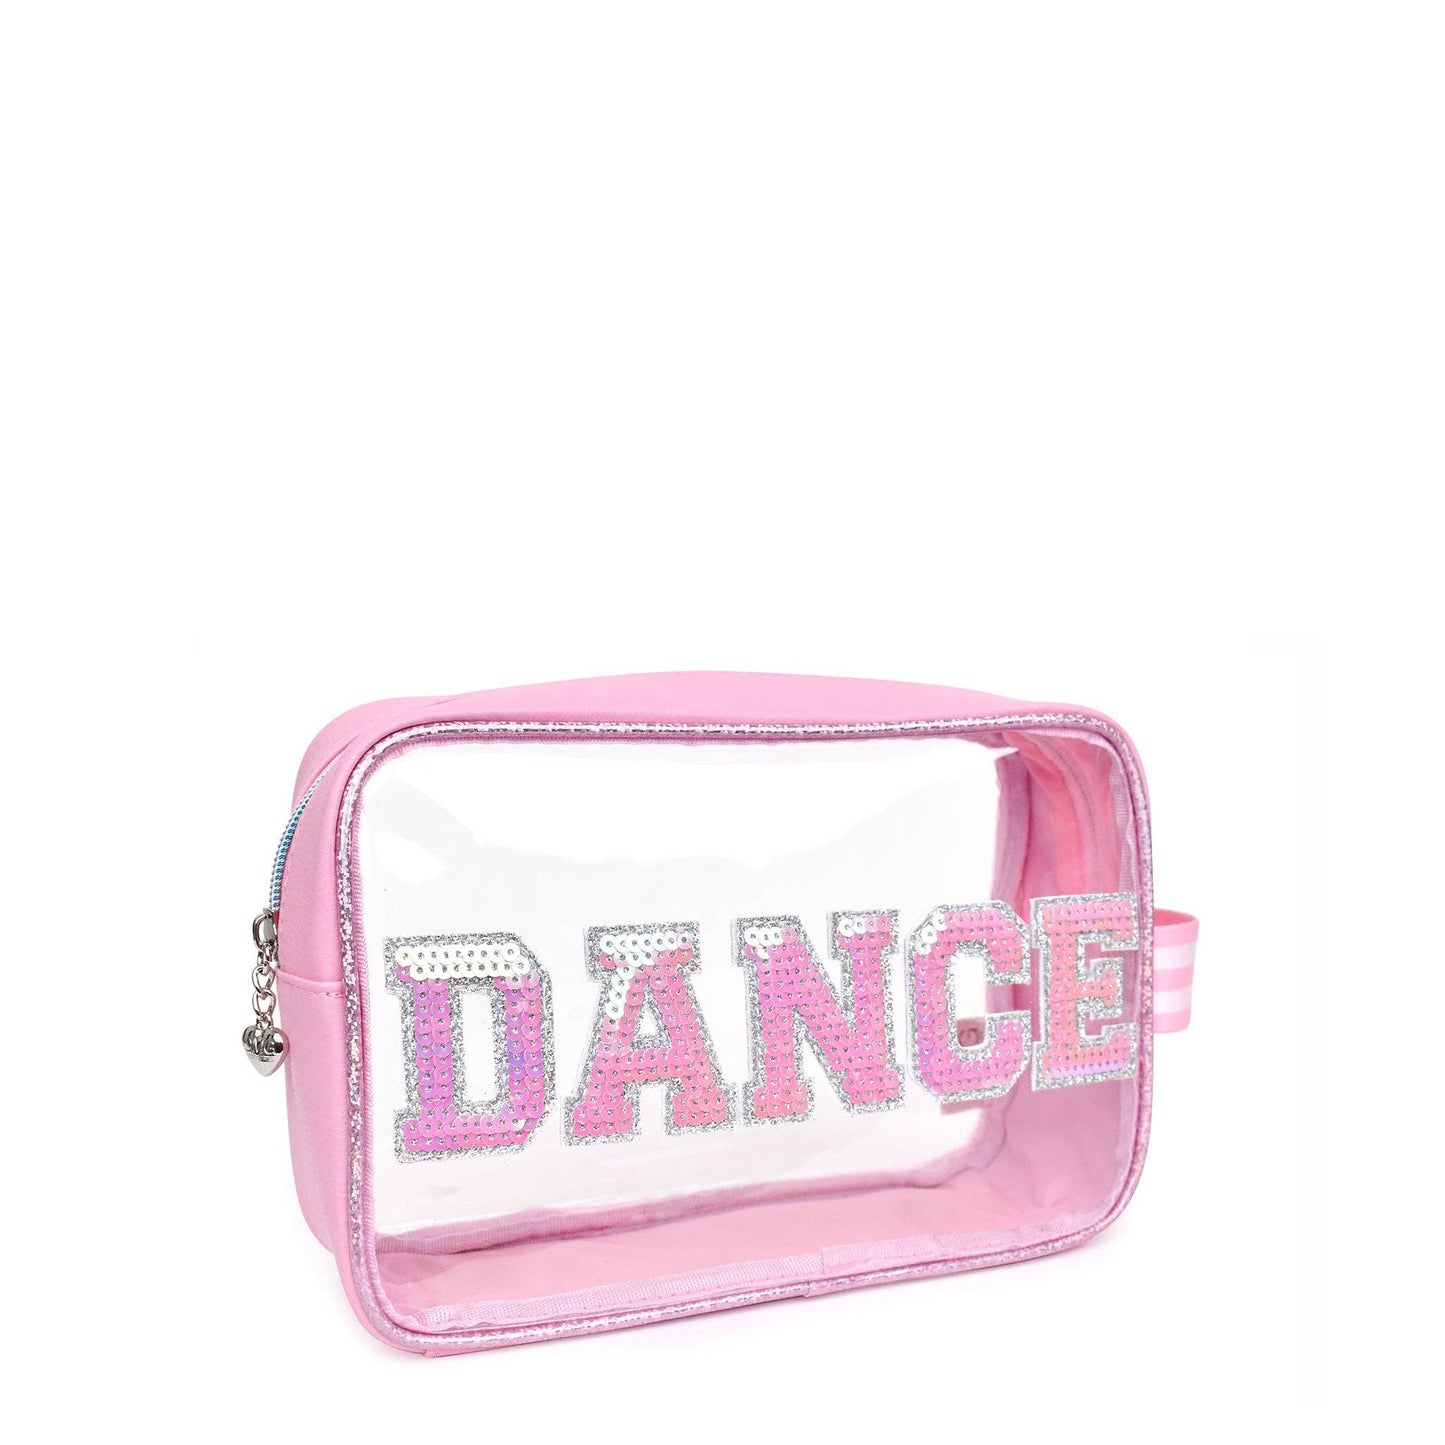 'Dance' Clear Sequin Pouch